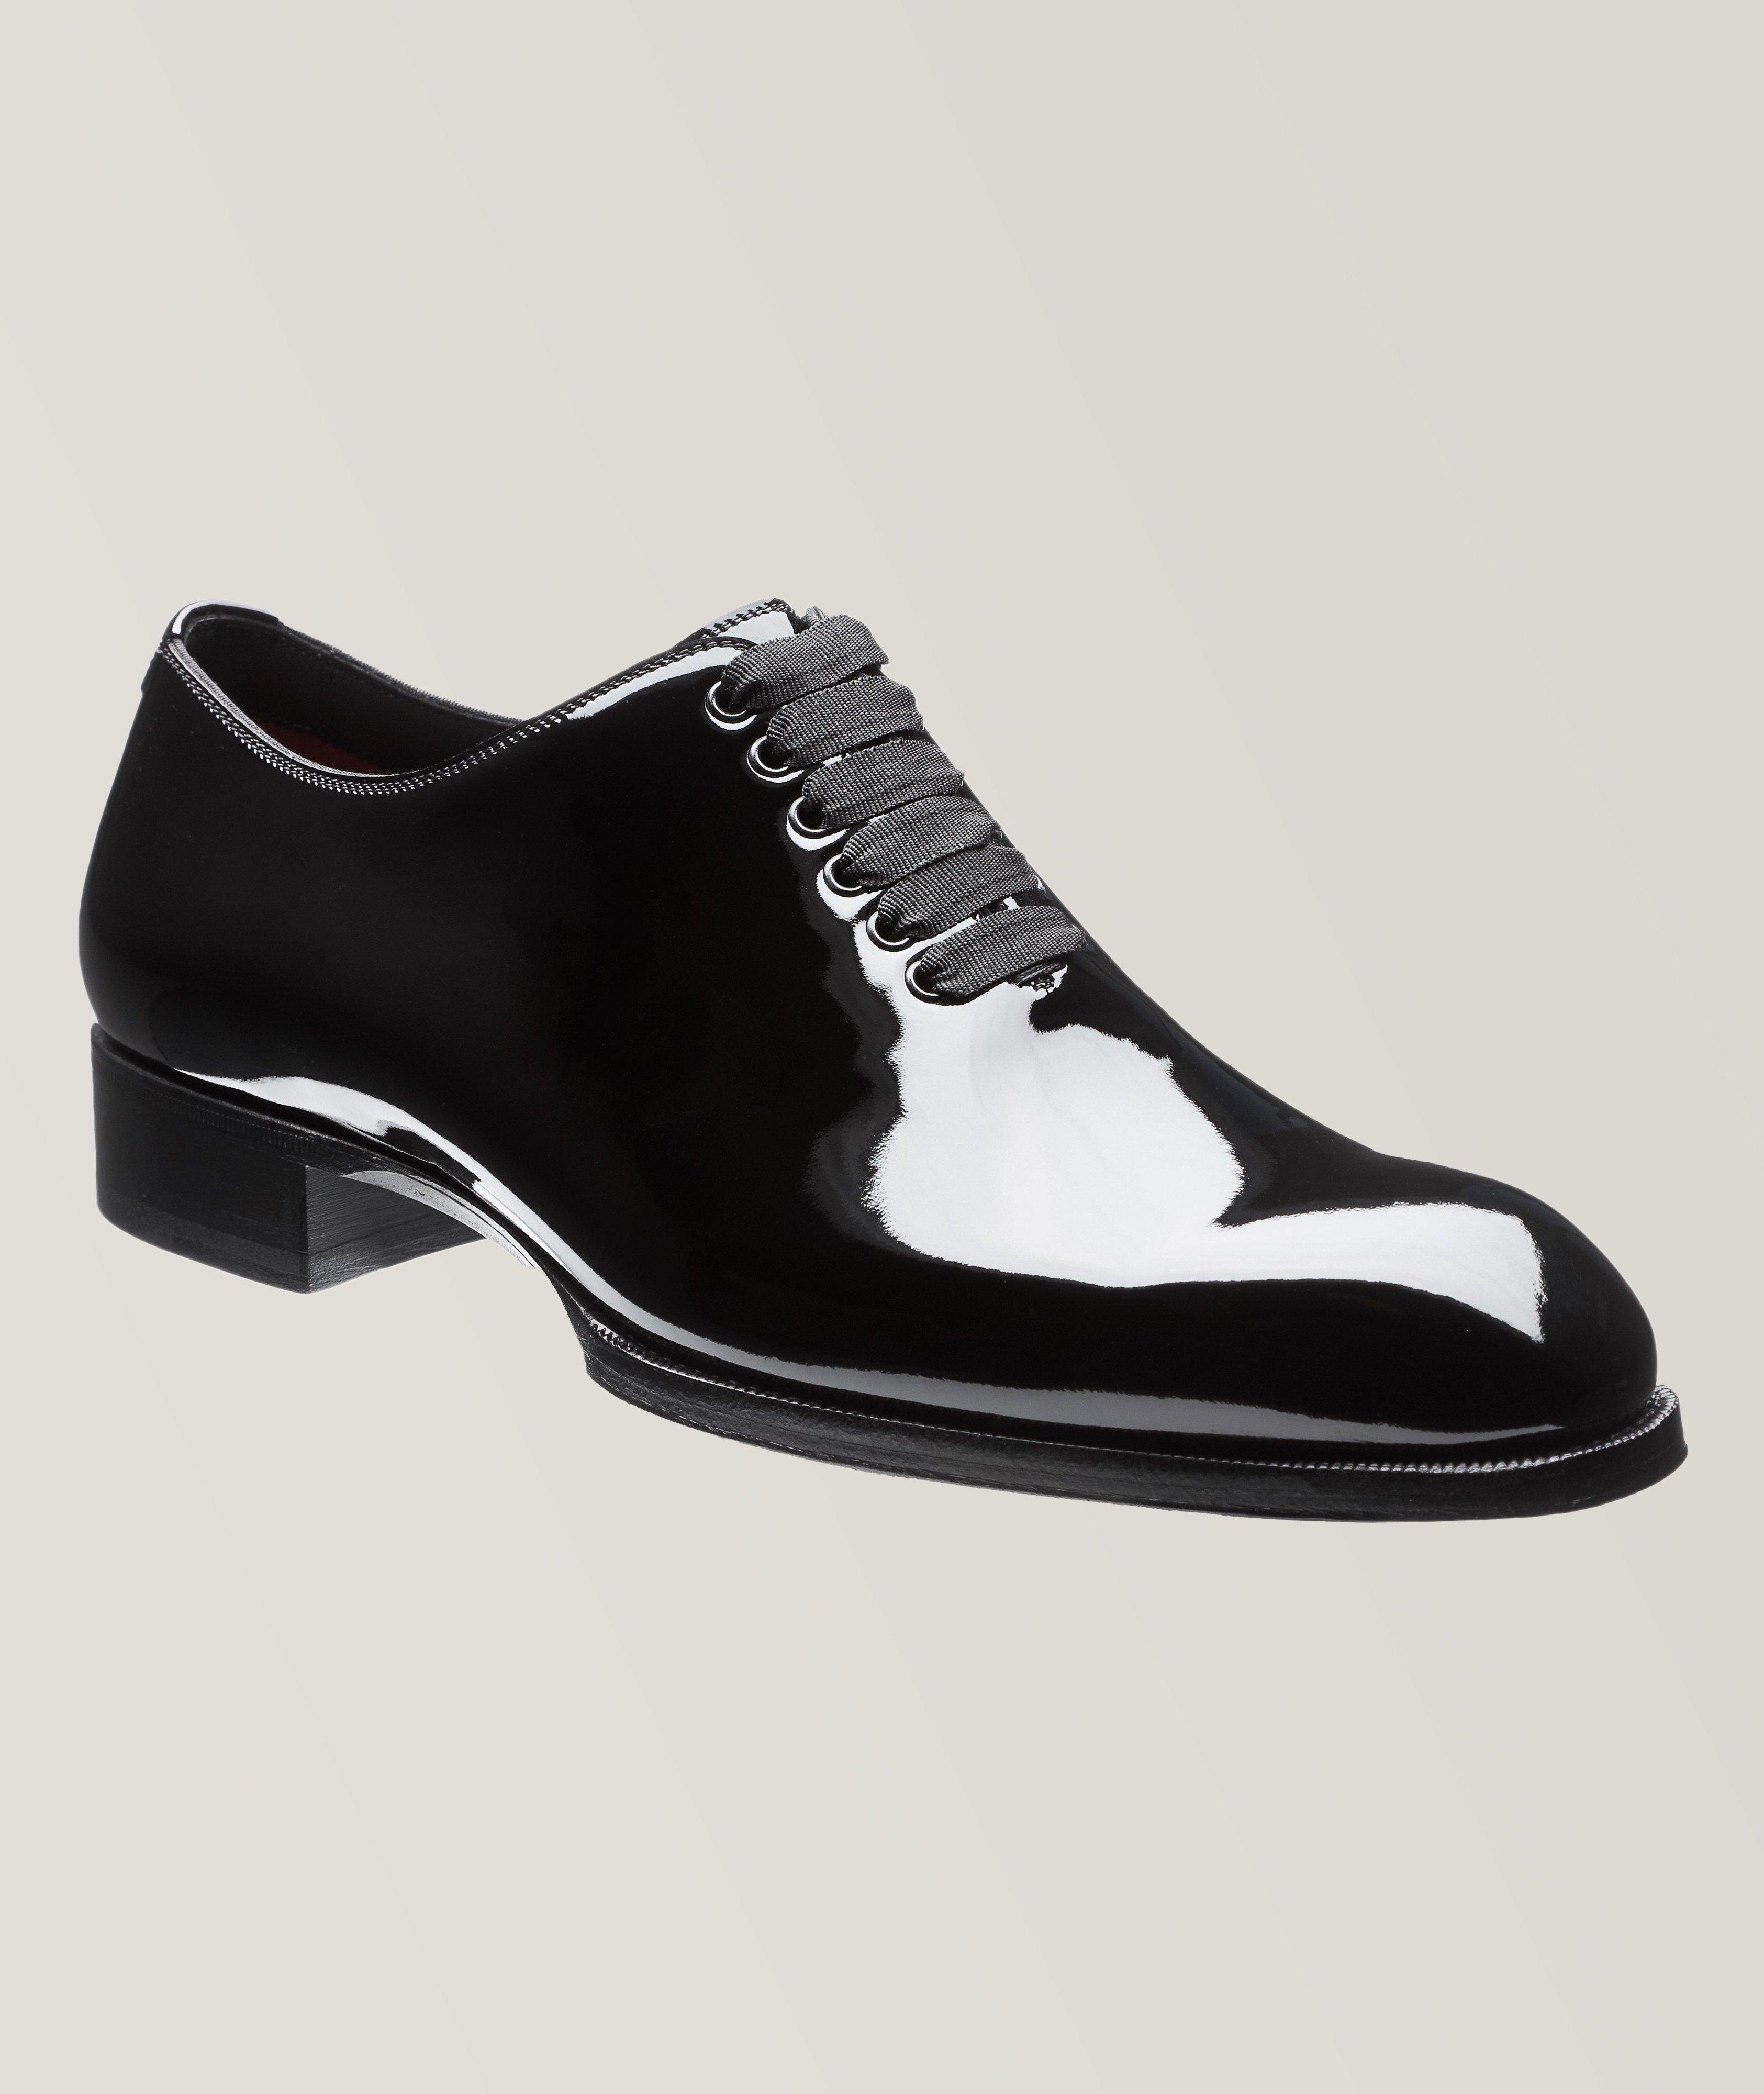 Elkan Whole-Cut Patent-Leather Oxford Shoes